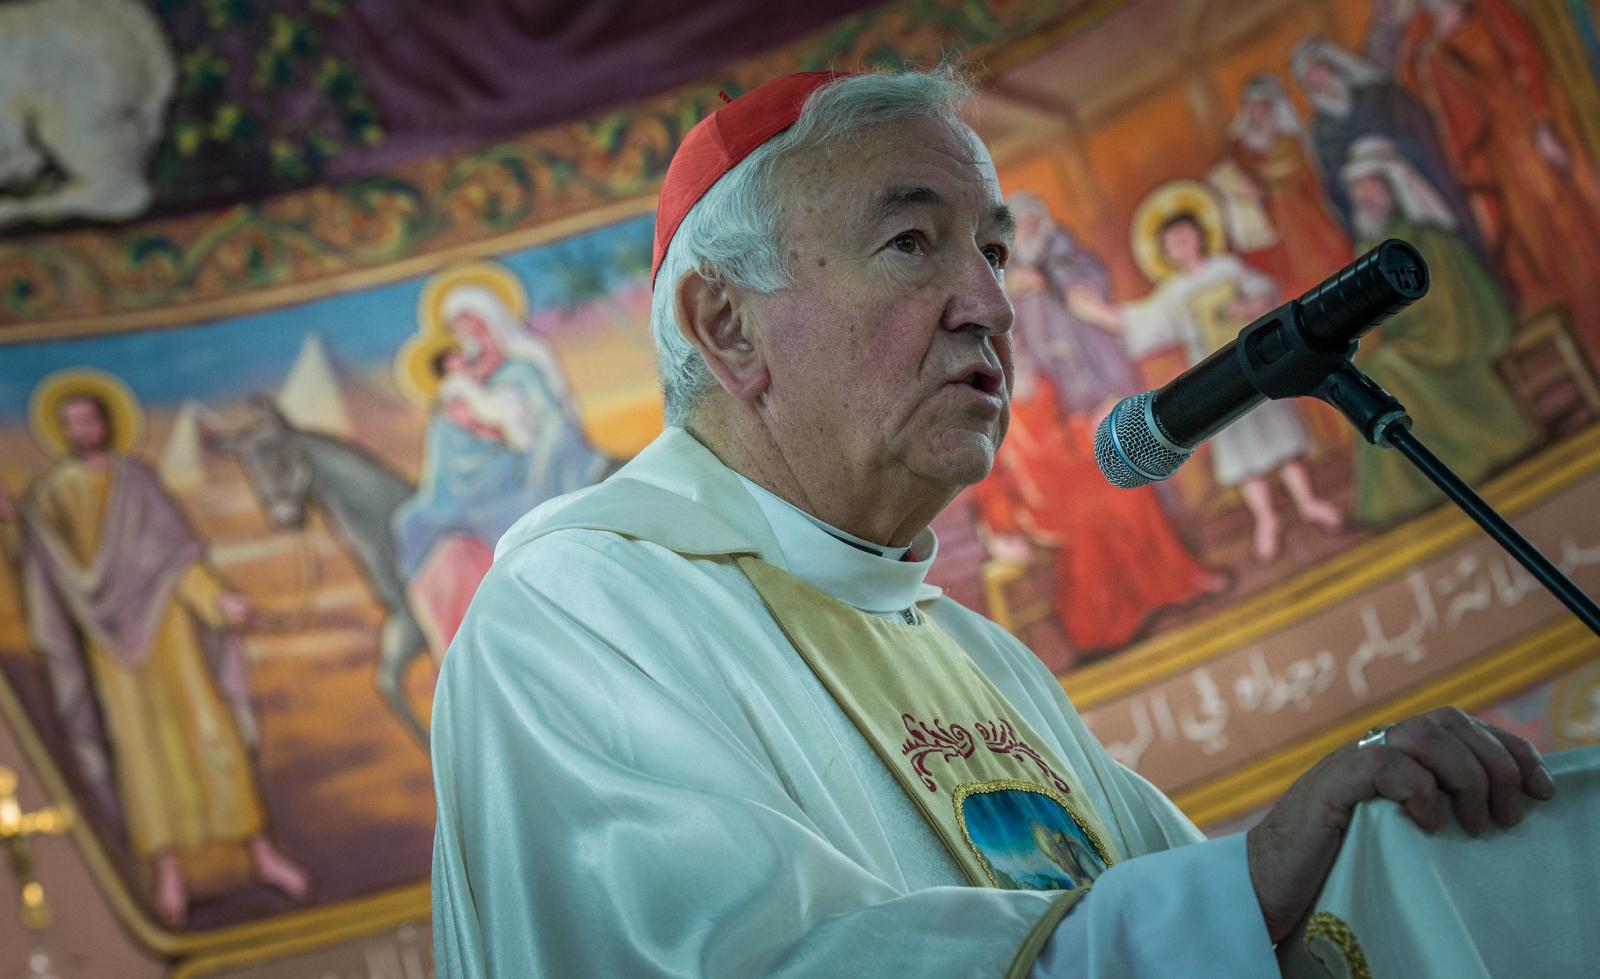 Cardinal expresses horror at killings in Holy Family Church compound - Diocese of Westminster